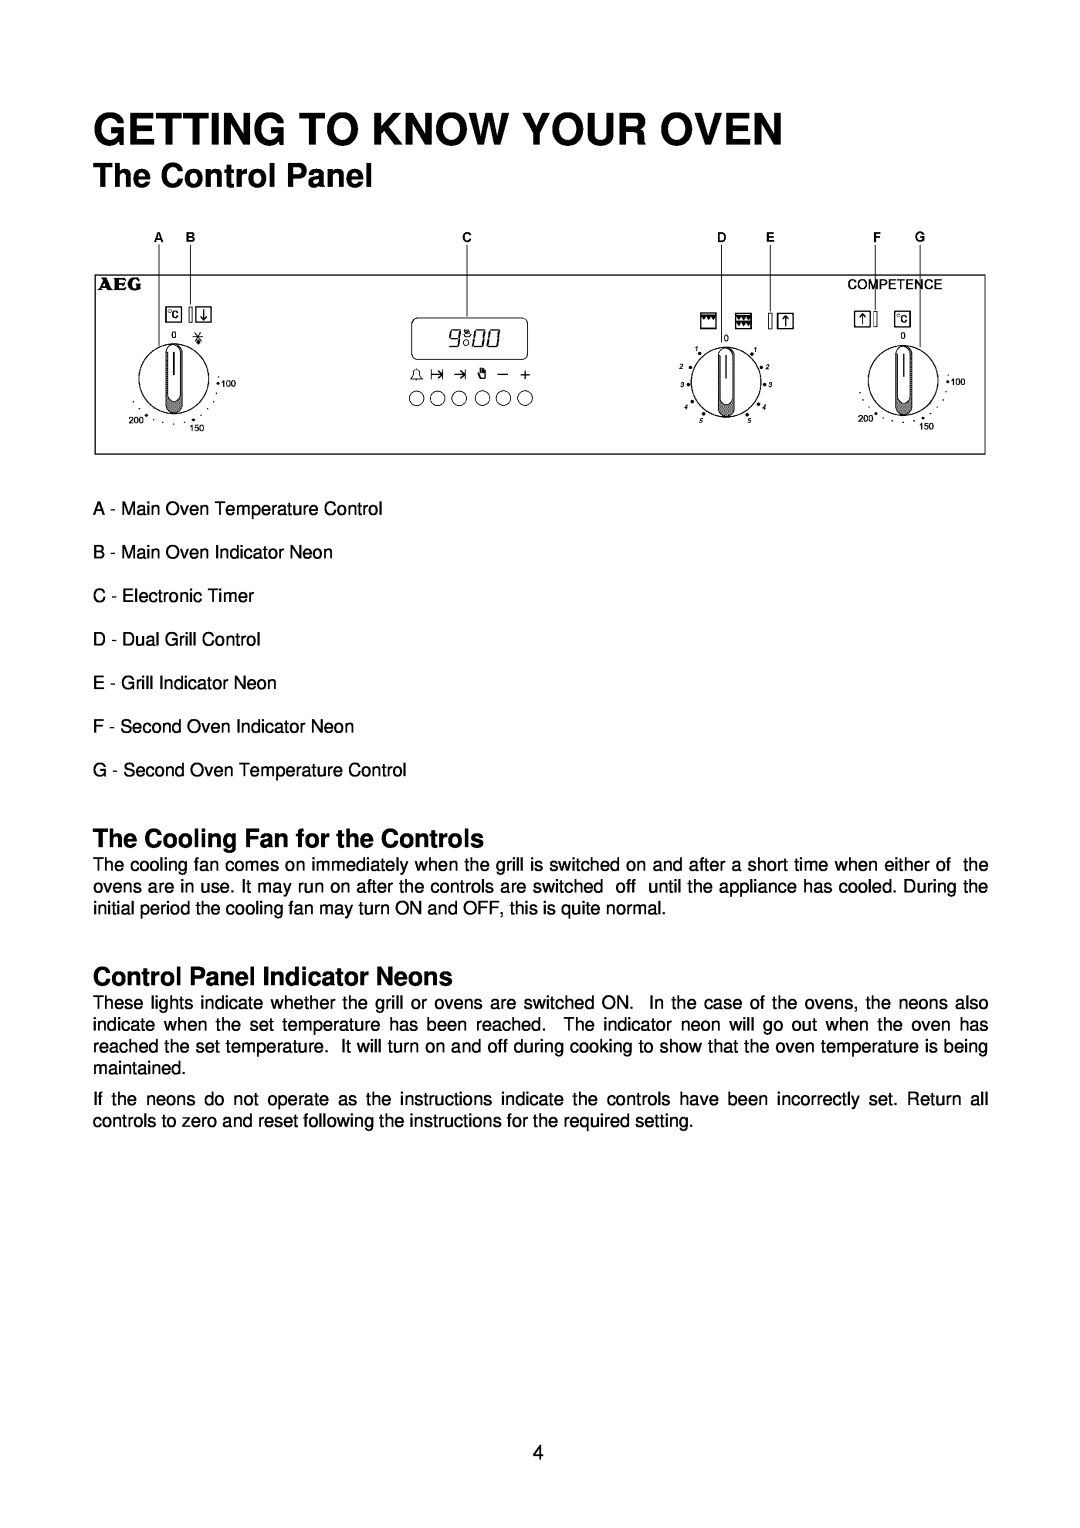 Electrolux D2160 installation instructions Getting To Know Your Oven, The Control Panel, The Cooling Fan for the Controls 